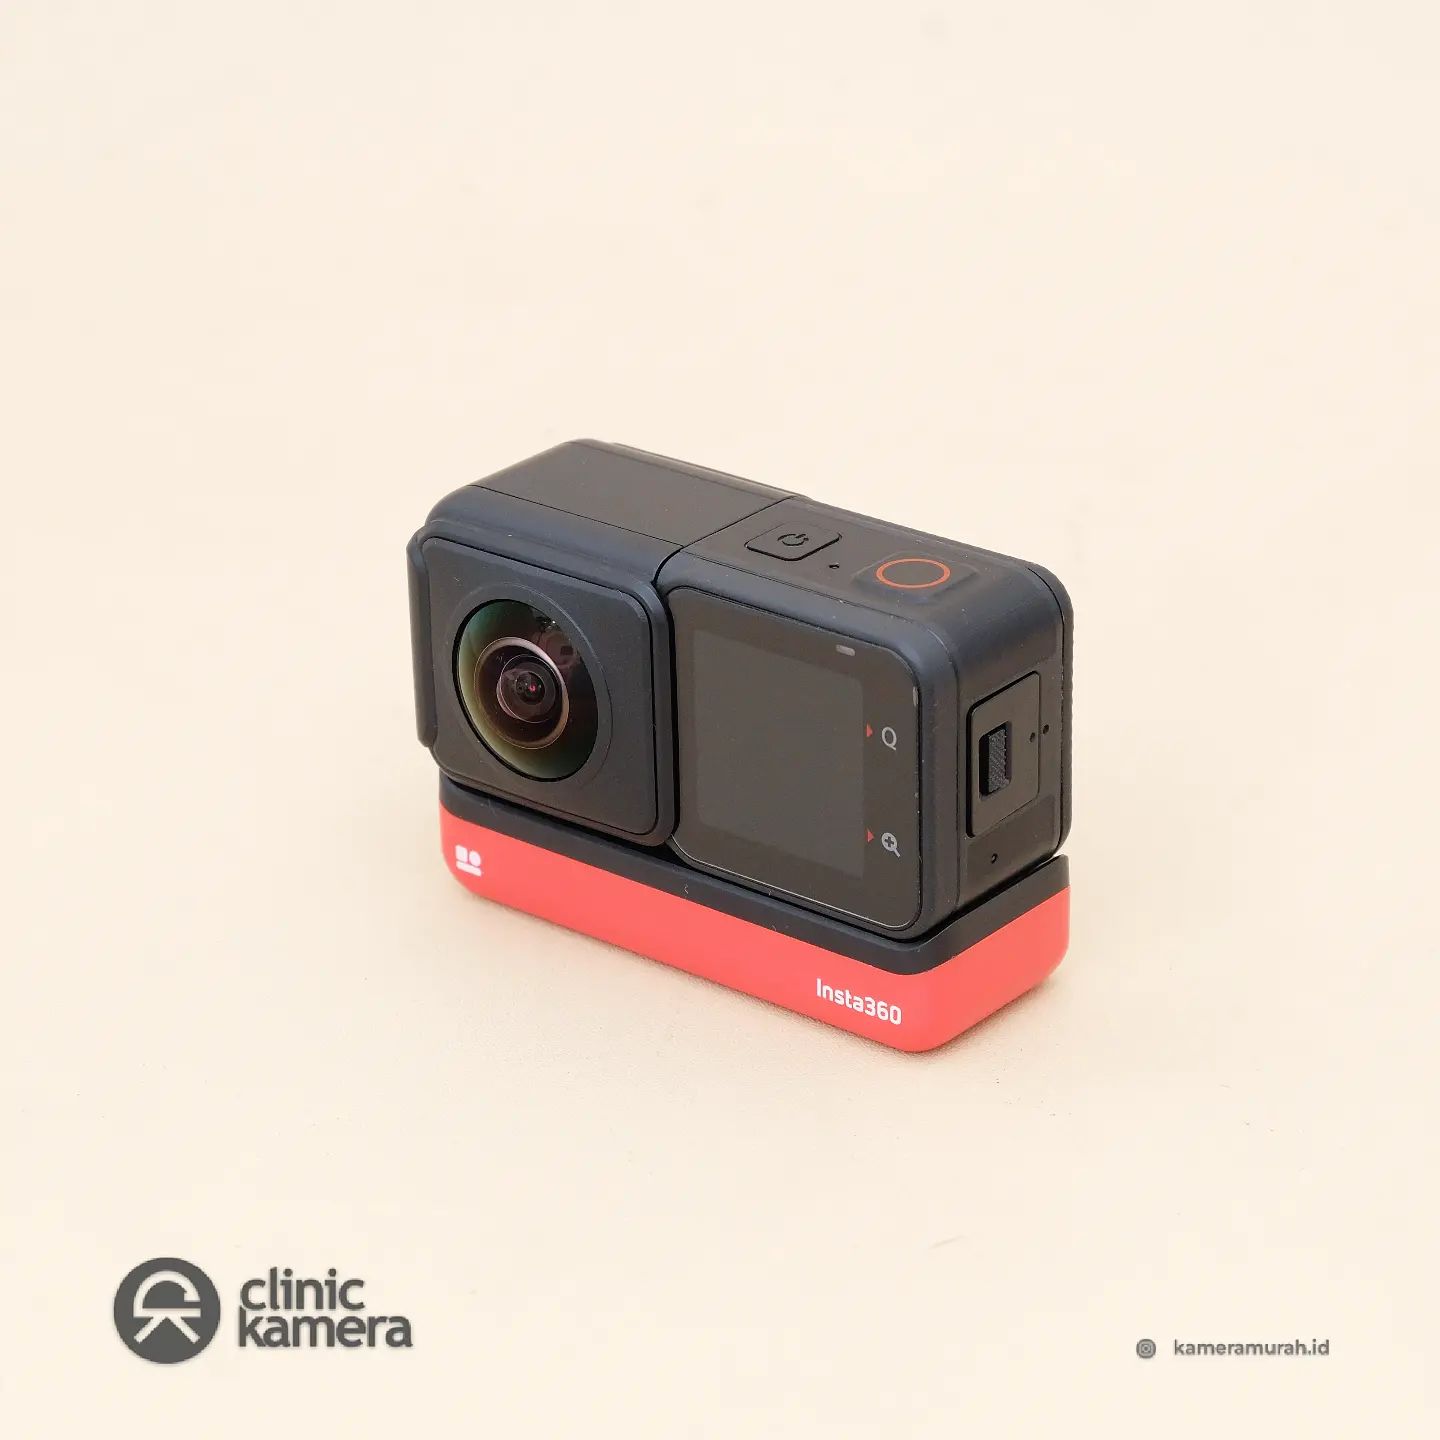 Insta360 One RS Twin Edition